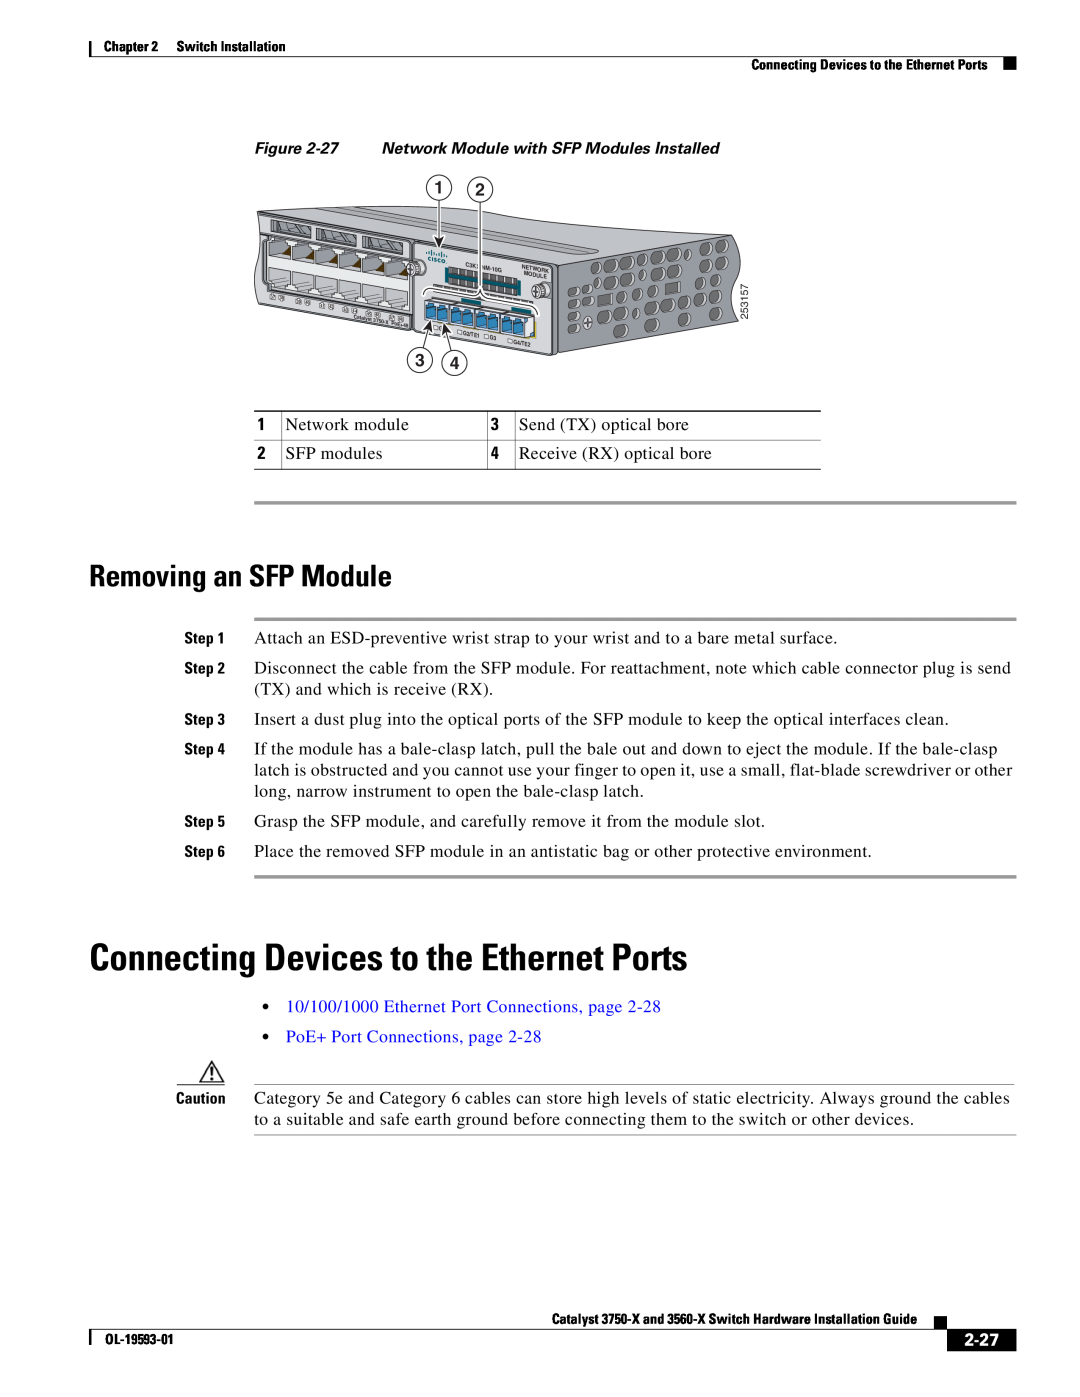 Cisco Systems 3560-X Connecting Devices to the Ethernet Ports, Removing an SFP Module, PoE+ Port Connections, page, 2-27 